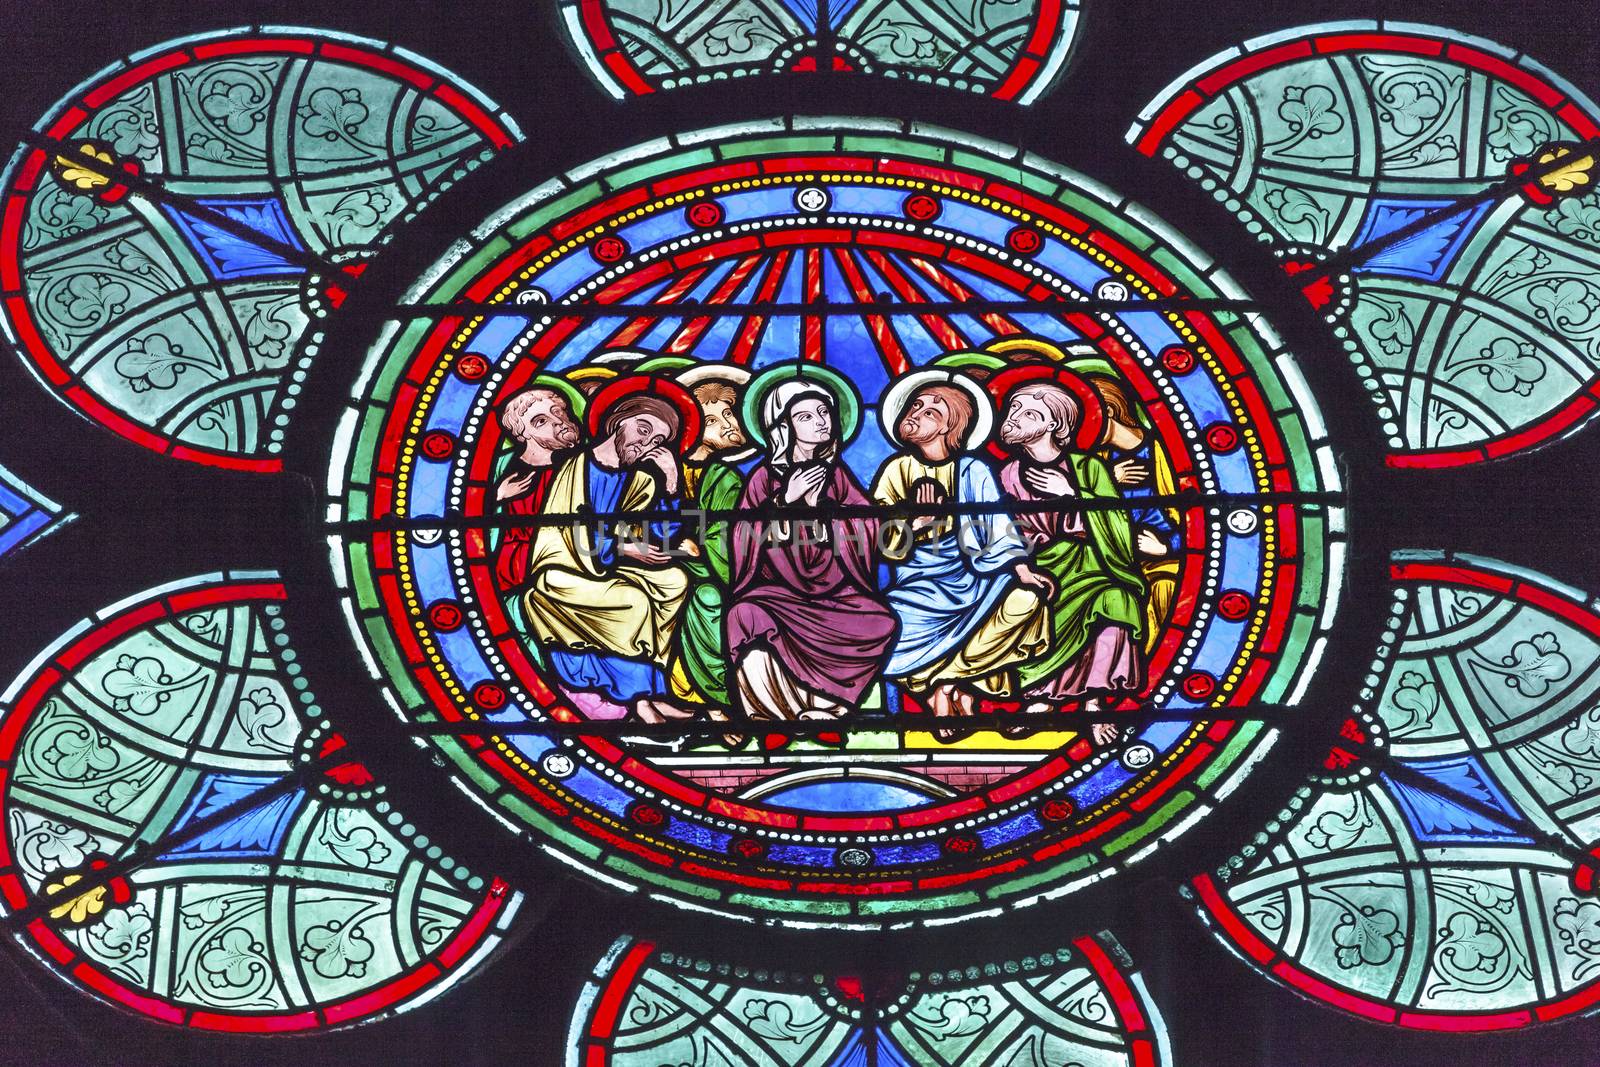 Mary Jesus Christ Disciples Stained Glass Notre Dame Paris by bill_perry